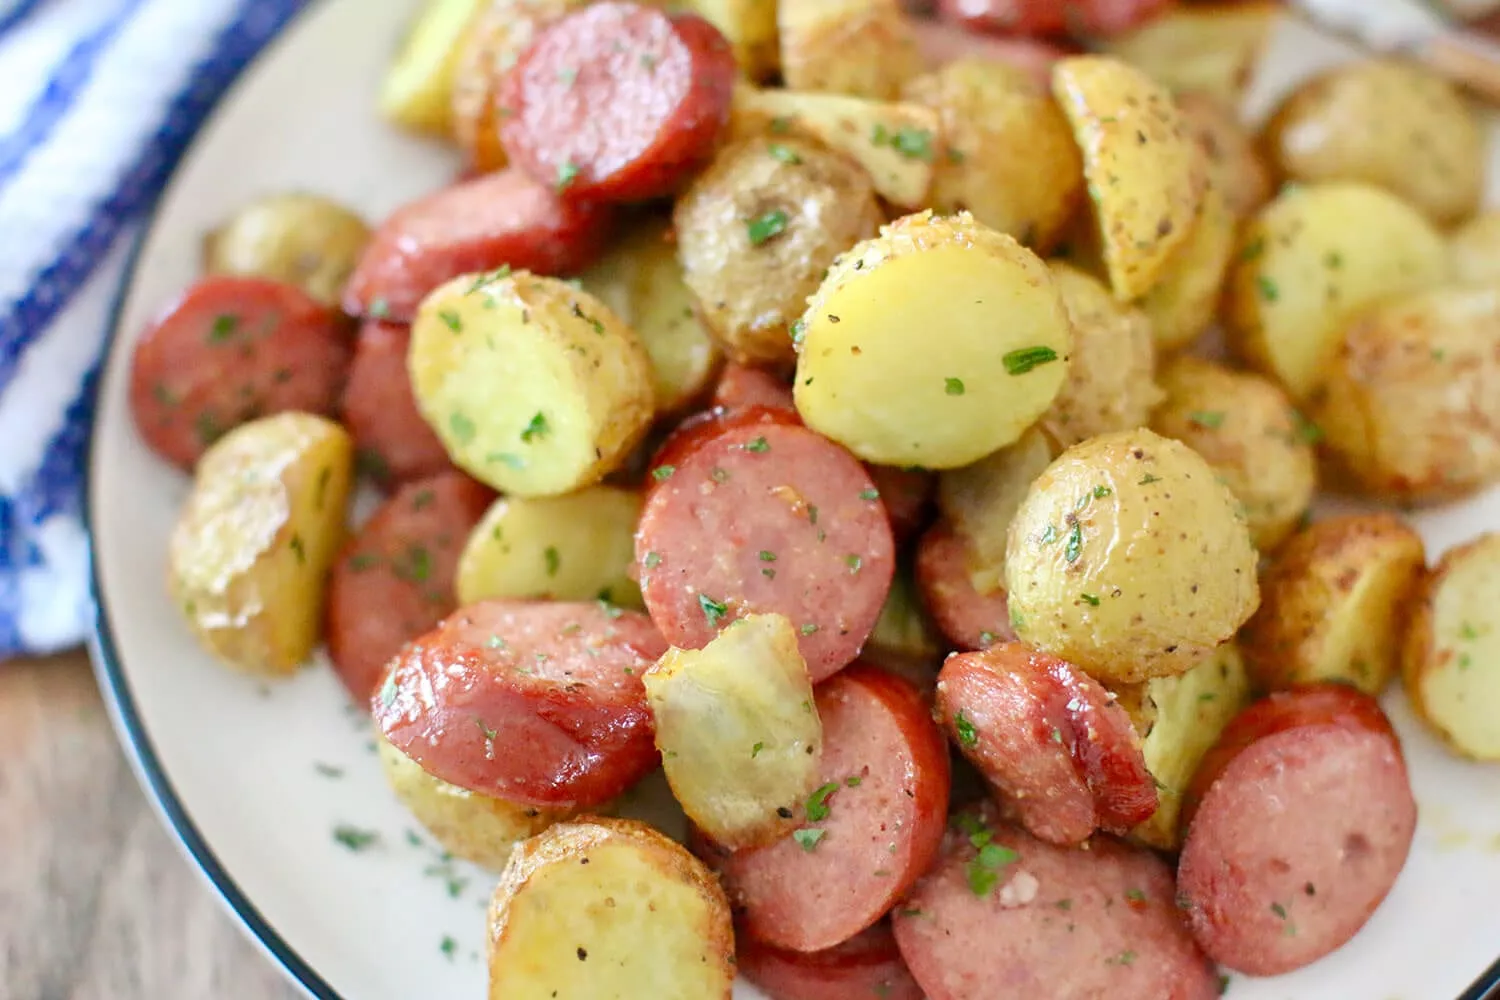 A delicious Air Fryer meal with sausages and little potatoes.